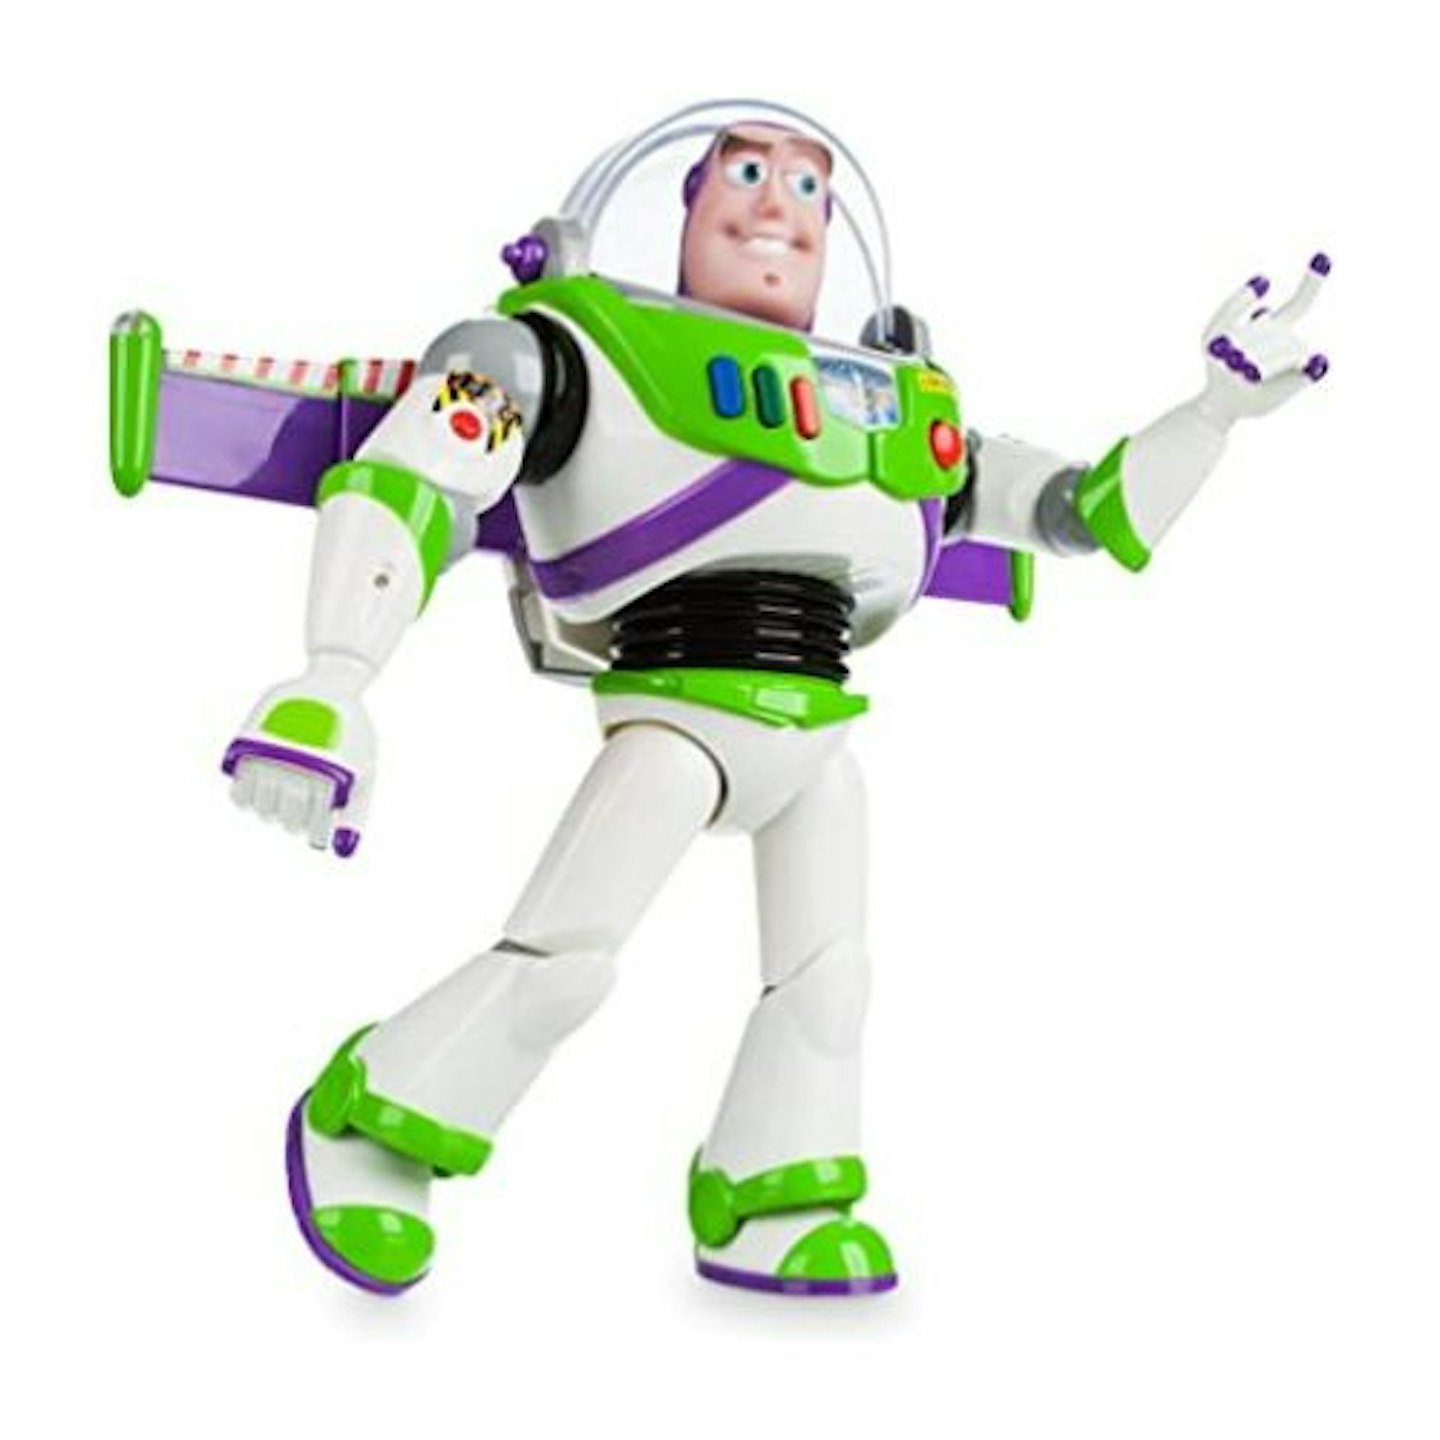 Disney Store Official Buzz Lightyear Interactive Talking Action Figure